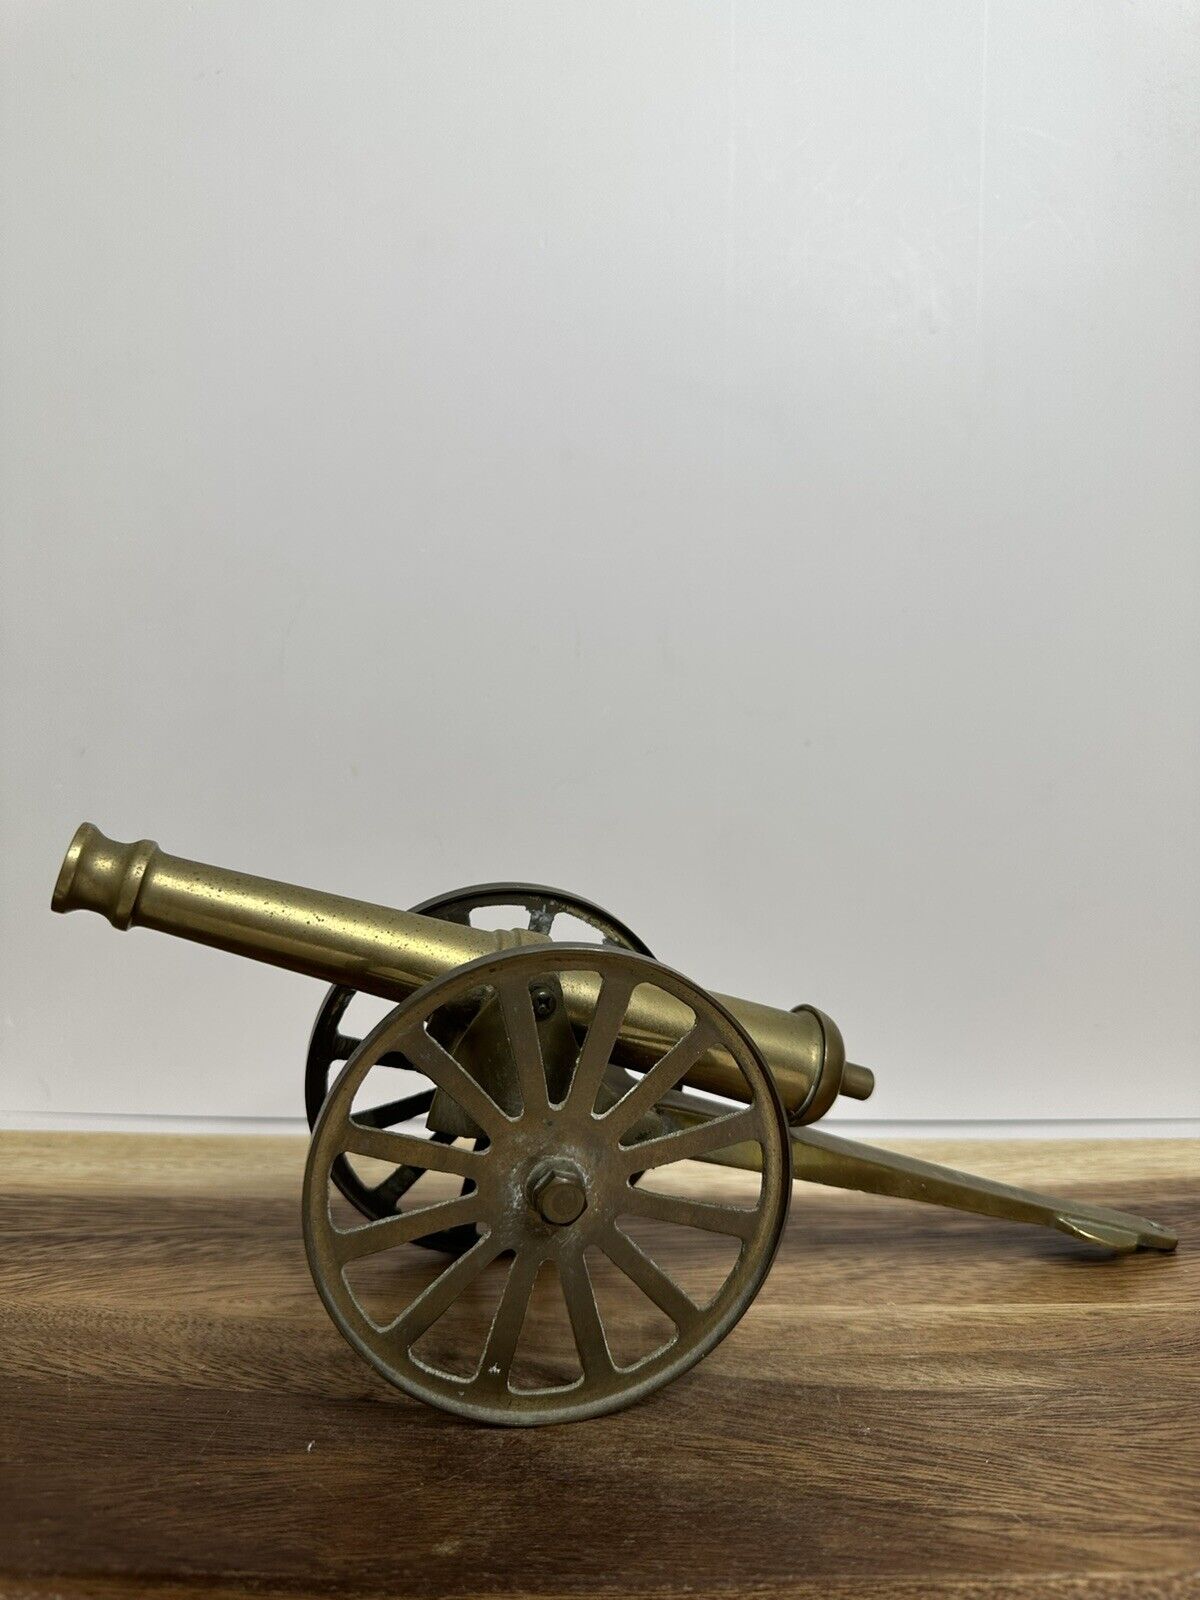 Vintage Brass Cannon Made In Taiwan 11.5” Long